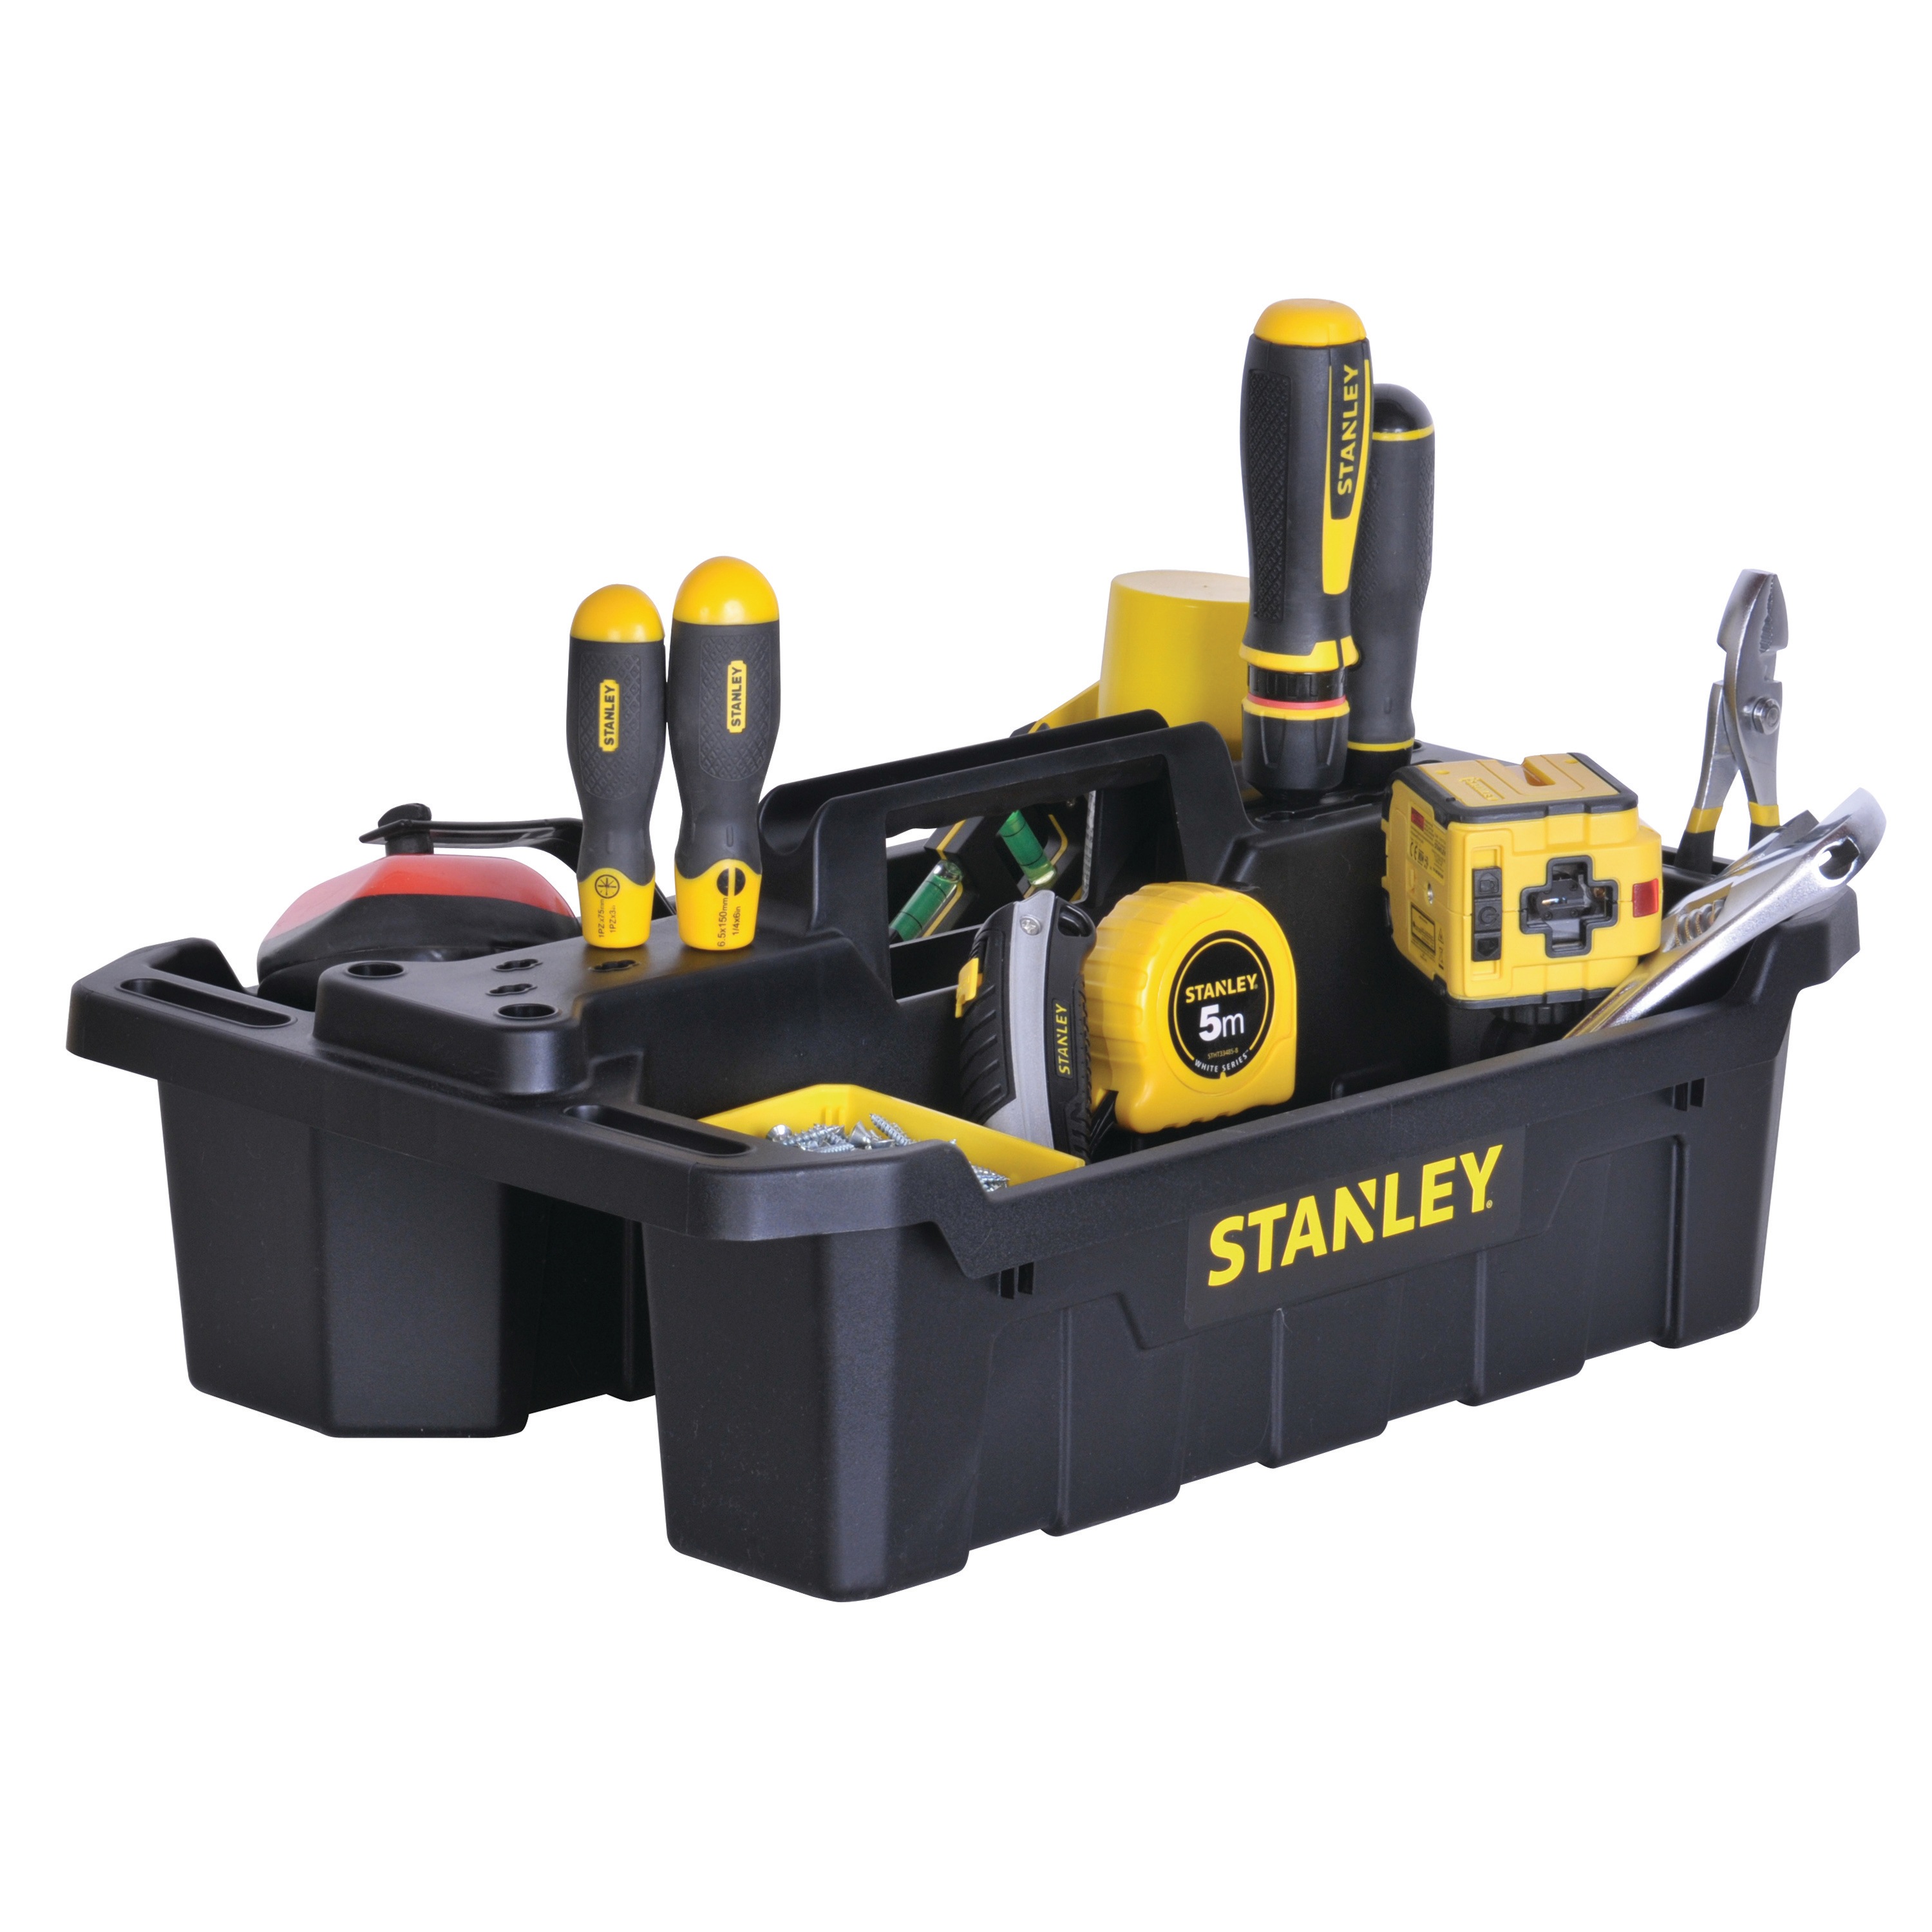 Stanley Tools - Portable Storage Tote Tray - STST41001